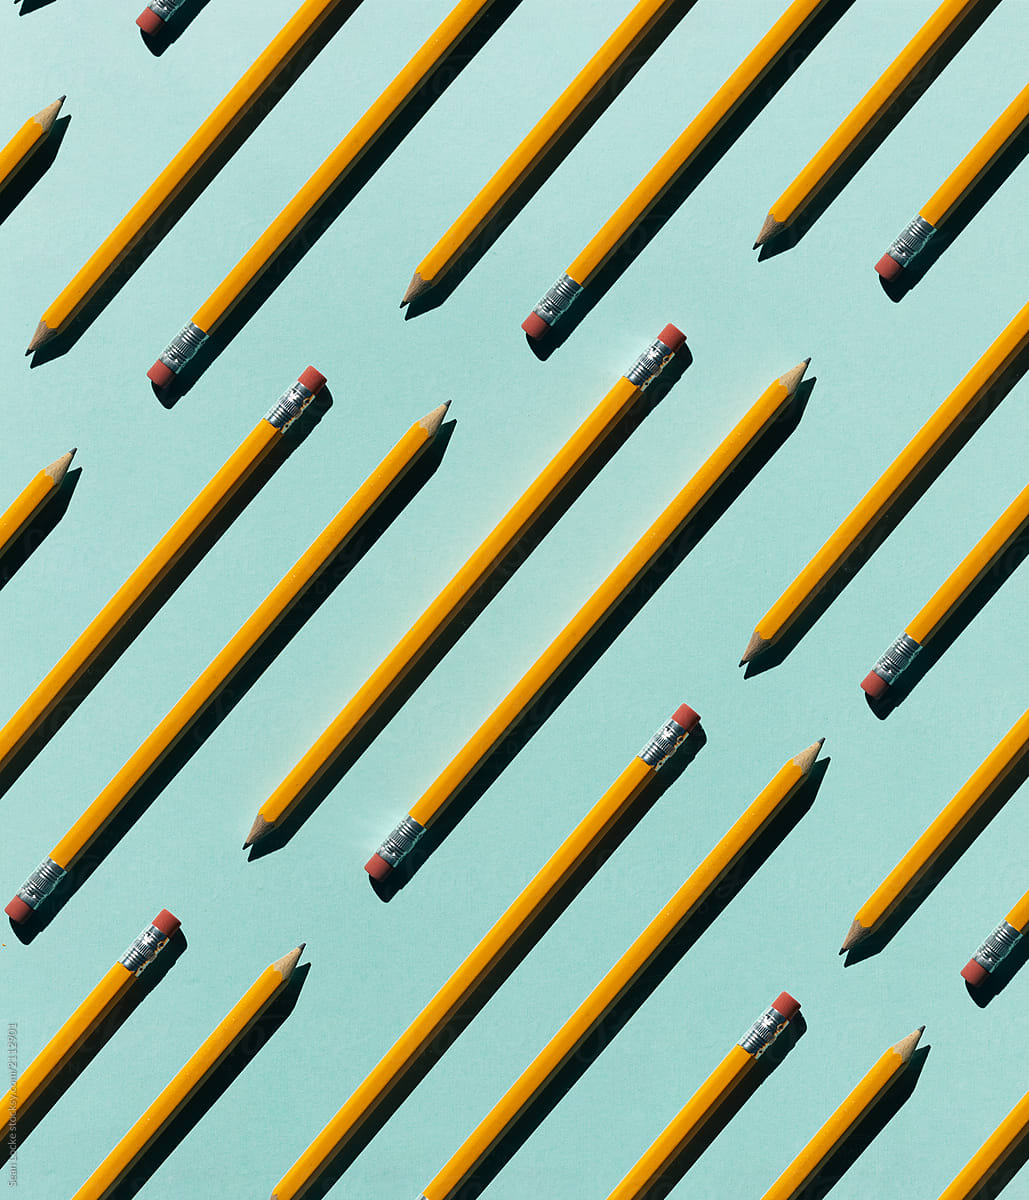 Pattern of Pencils On Blue Paper